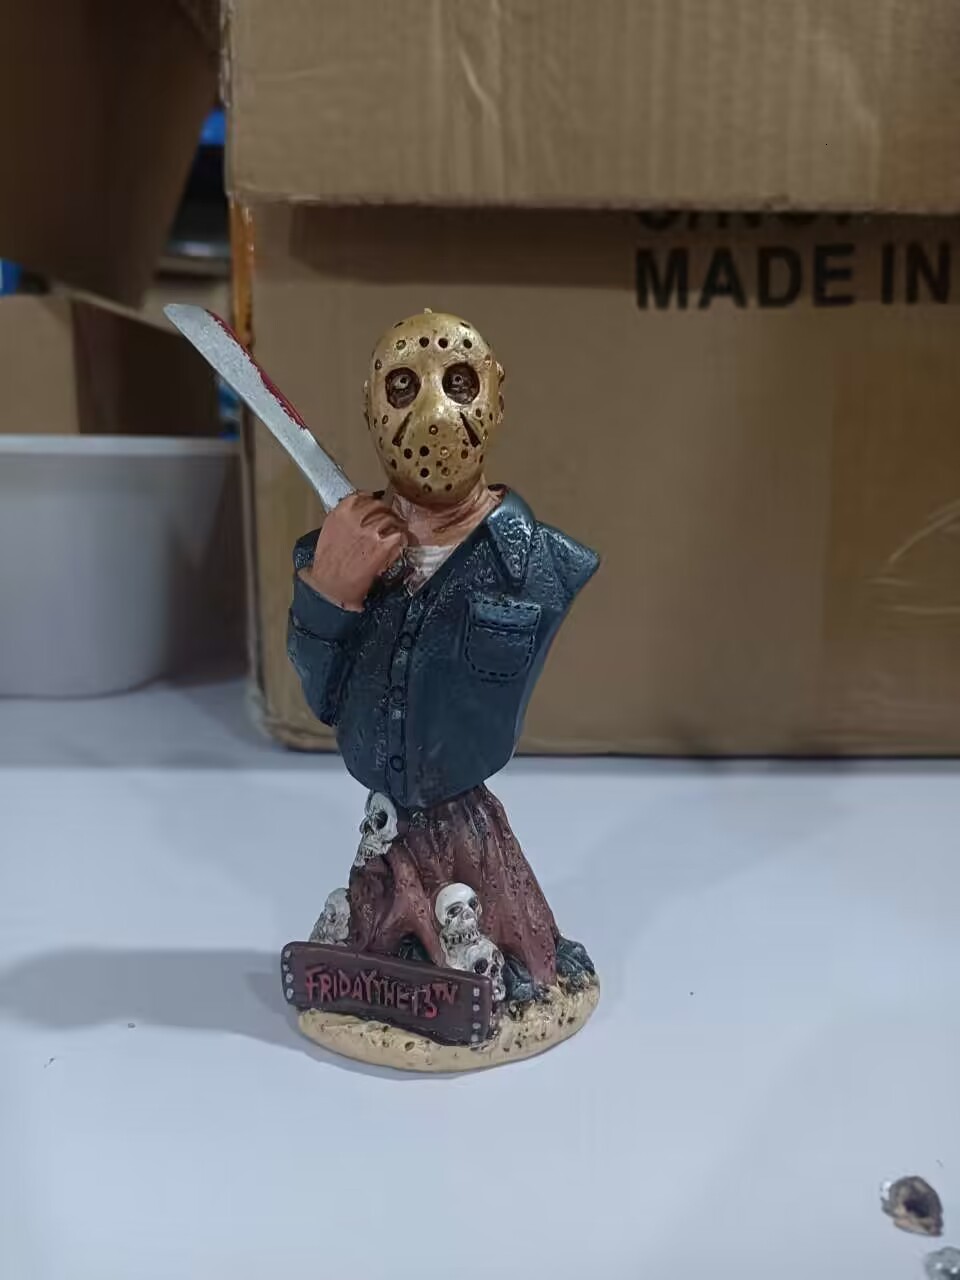 Halloween Horror Movie Sculpture Resin Craft Home Party Decor Statue Resin Figure Halloween Indoor Home Decor Collection Gifts 2202124